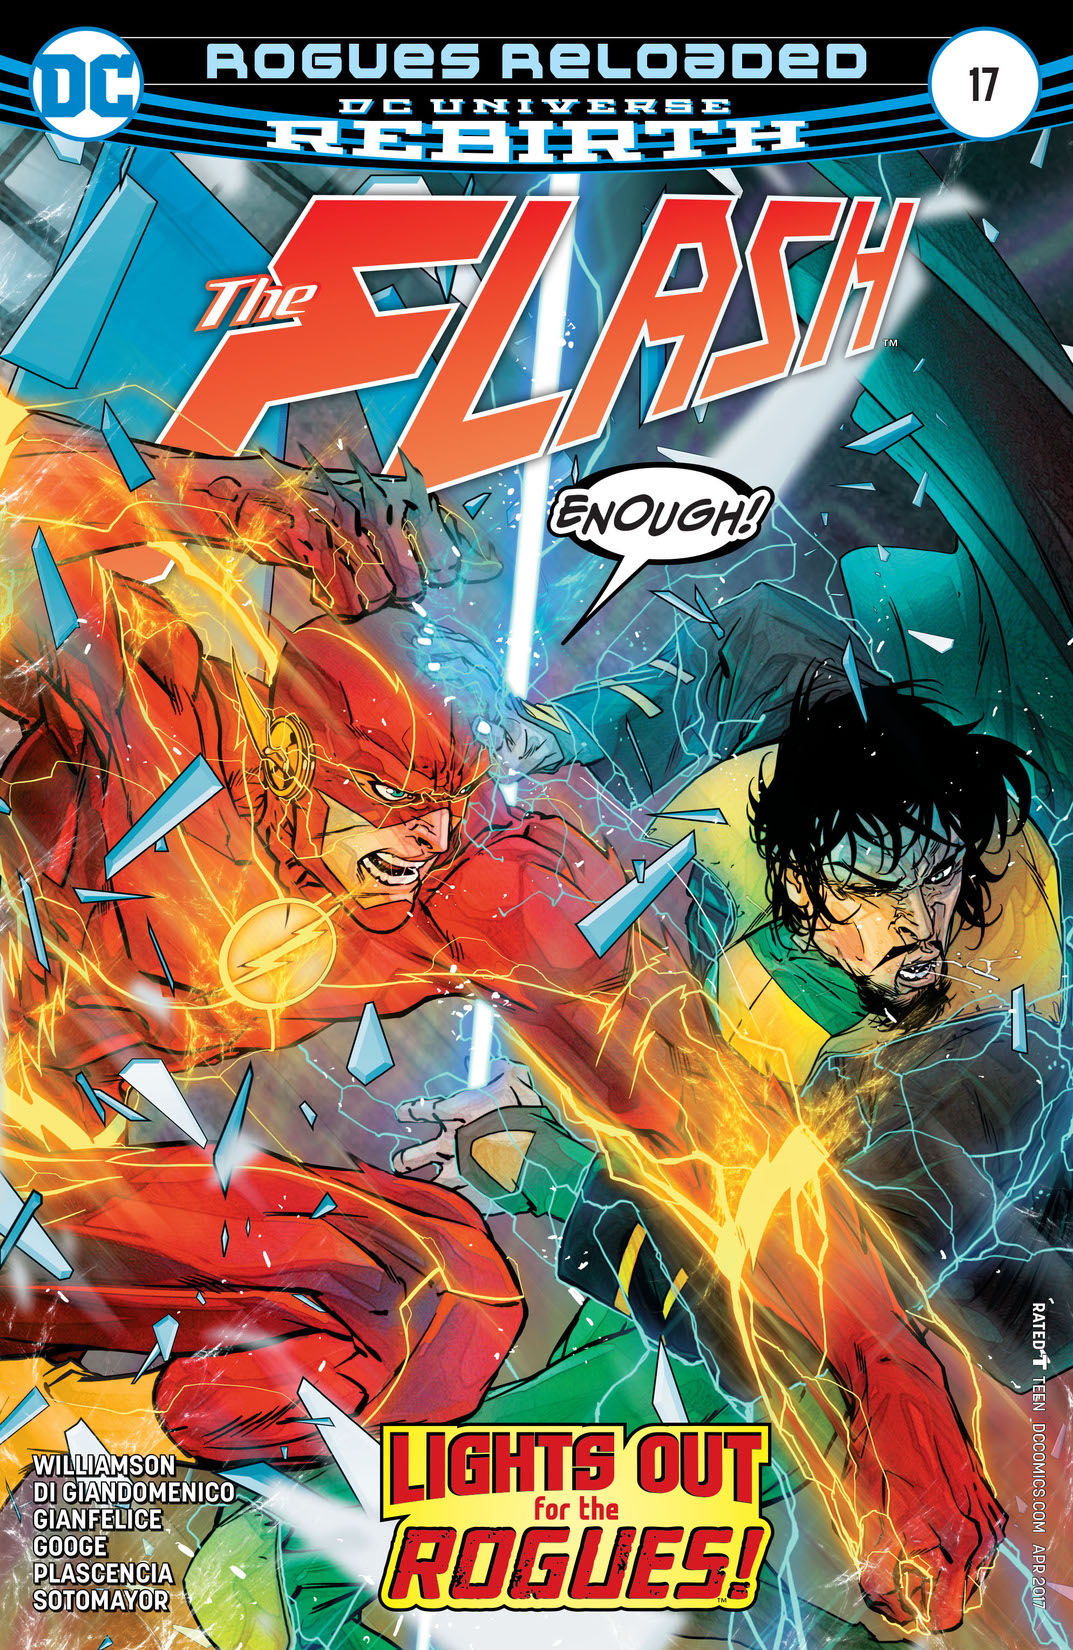 The Flash (2016-) #17 preview images